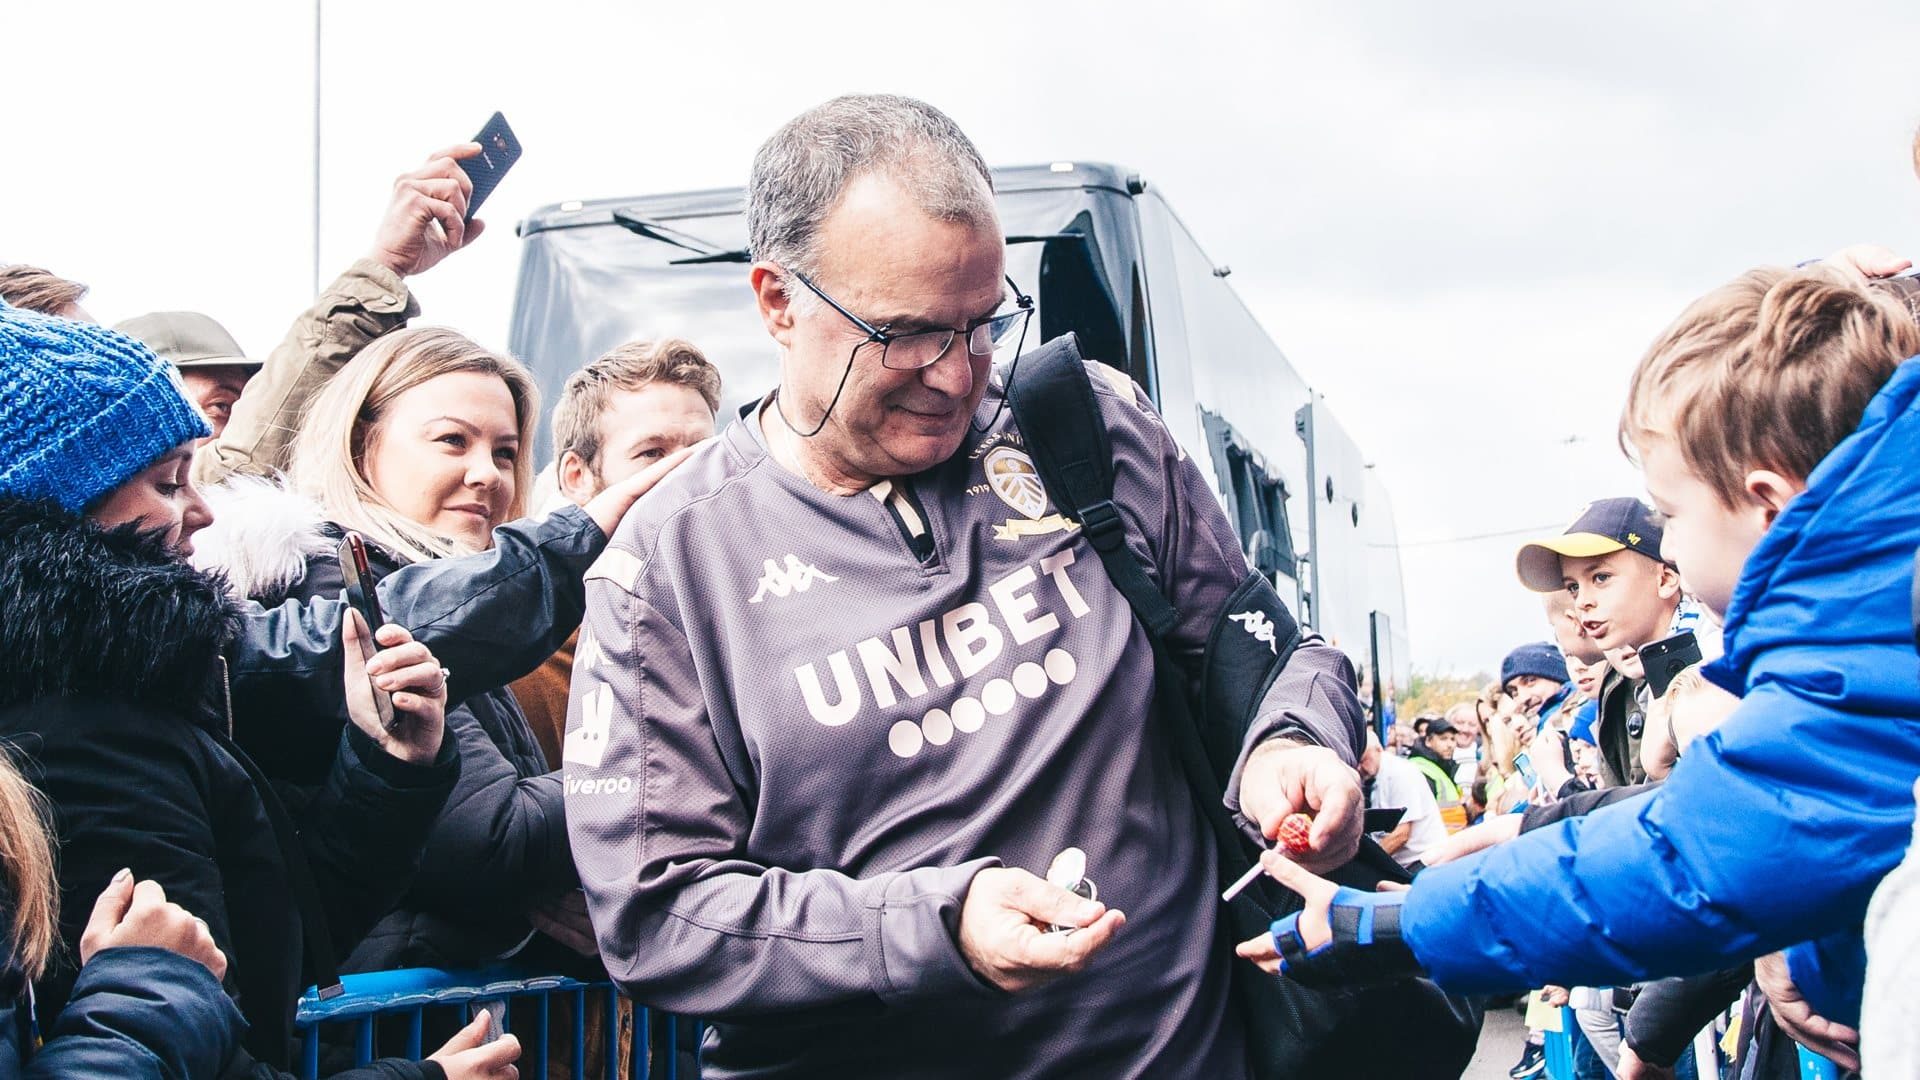 Marcelo Bielsa, arriving at Elland Road for the Centenary Game in 2019, handing out actual lollipops to kids